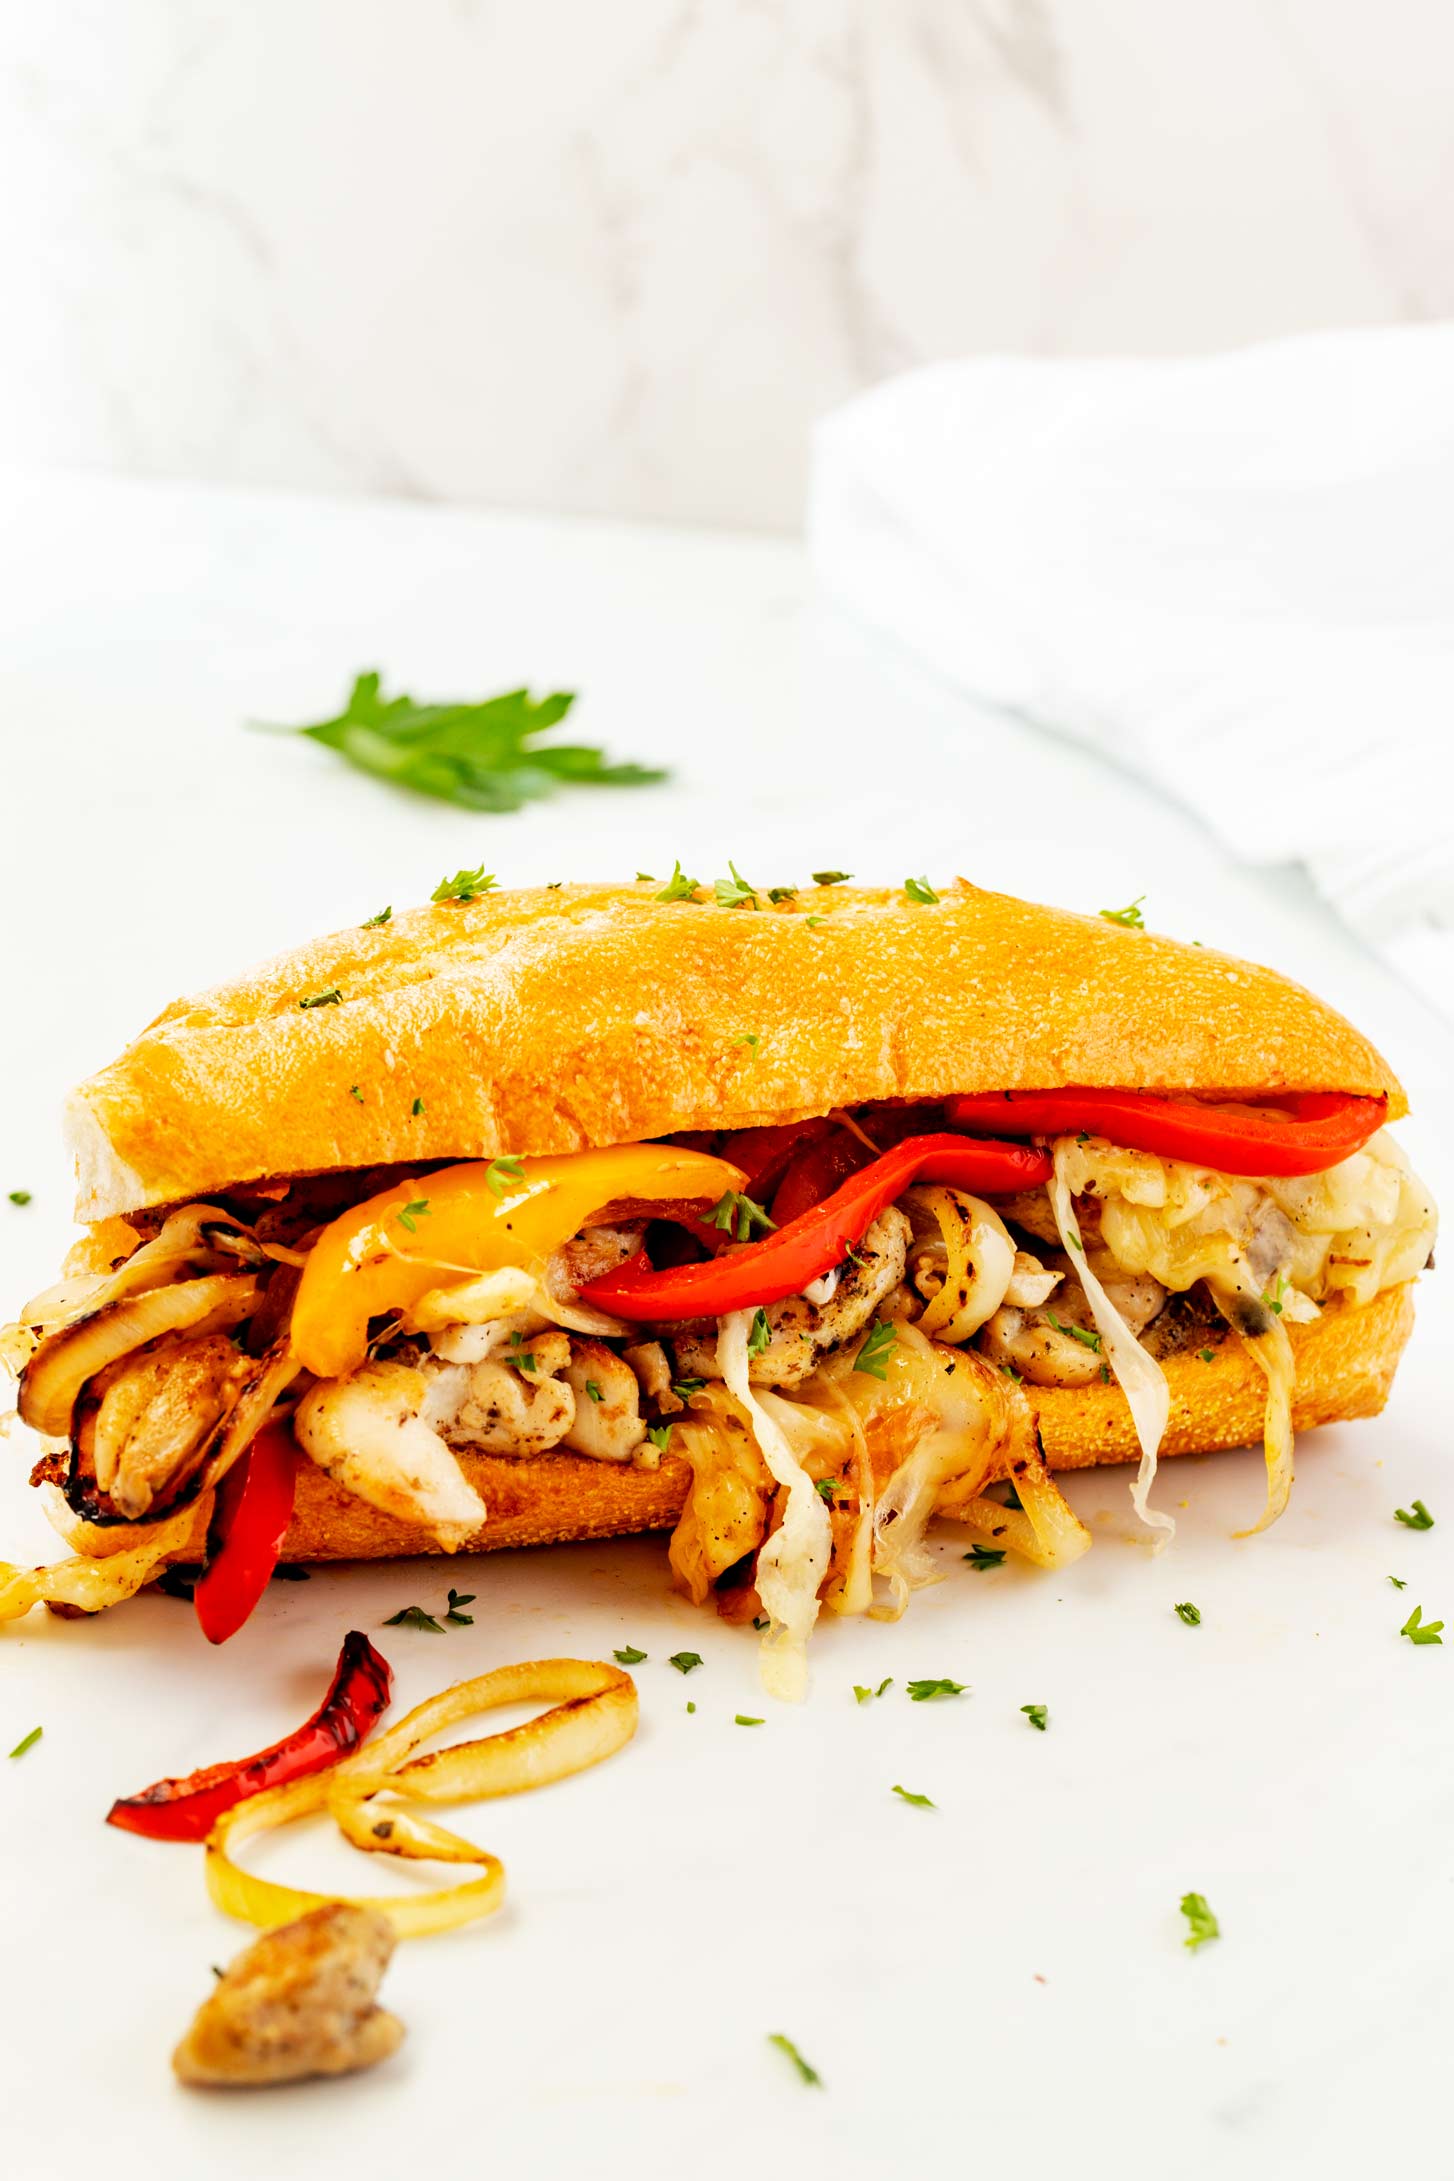 A white countertop with a chicken philly cheesesteak garnished with parsley.